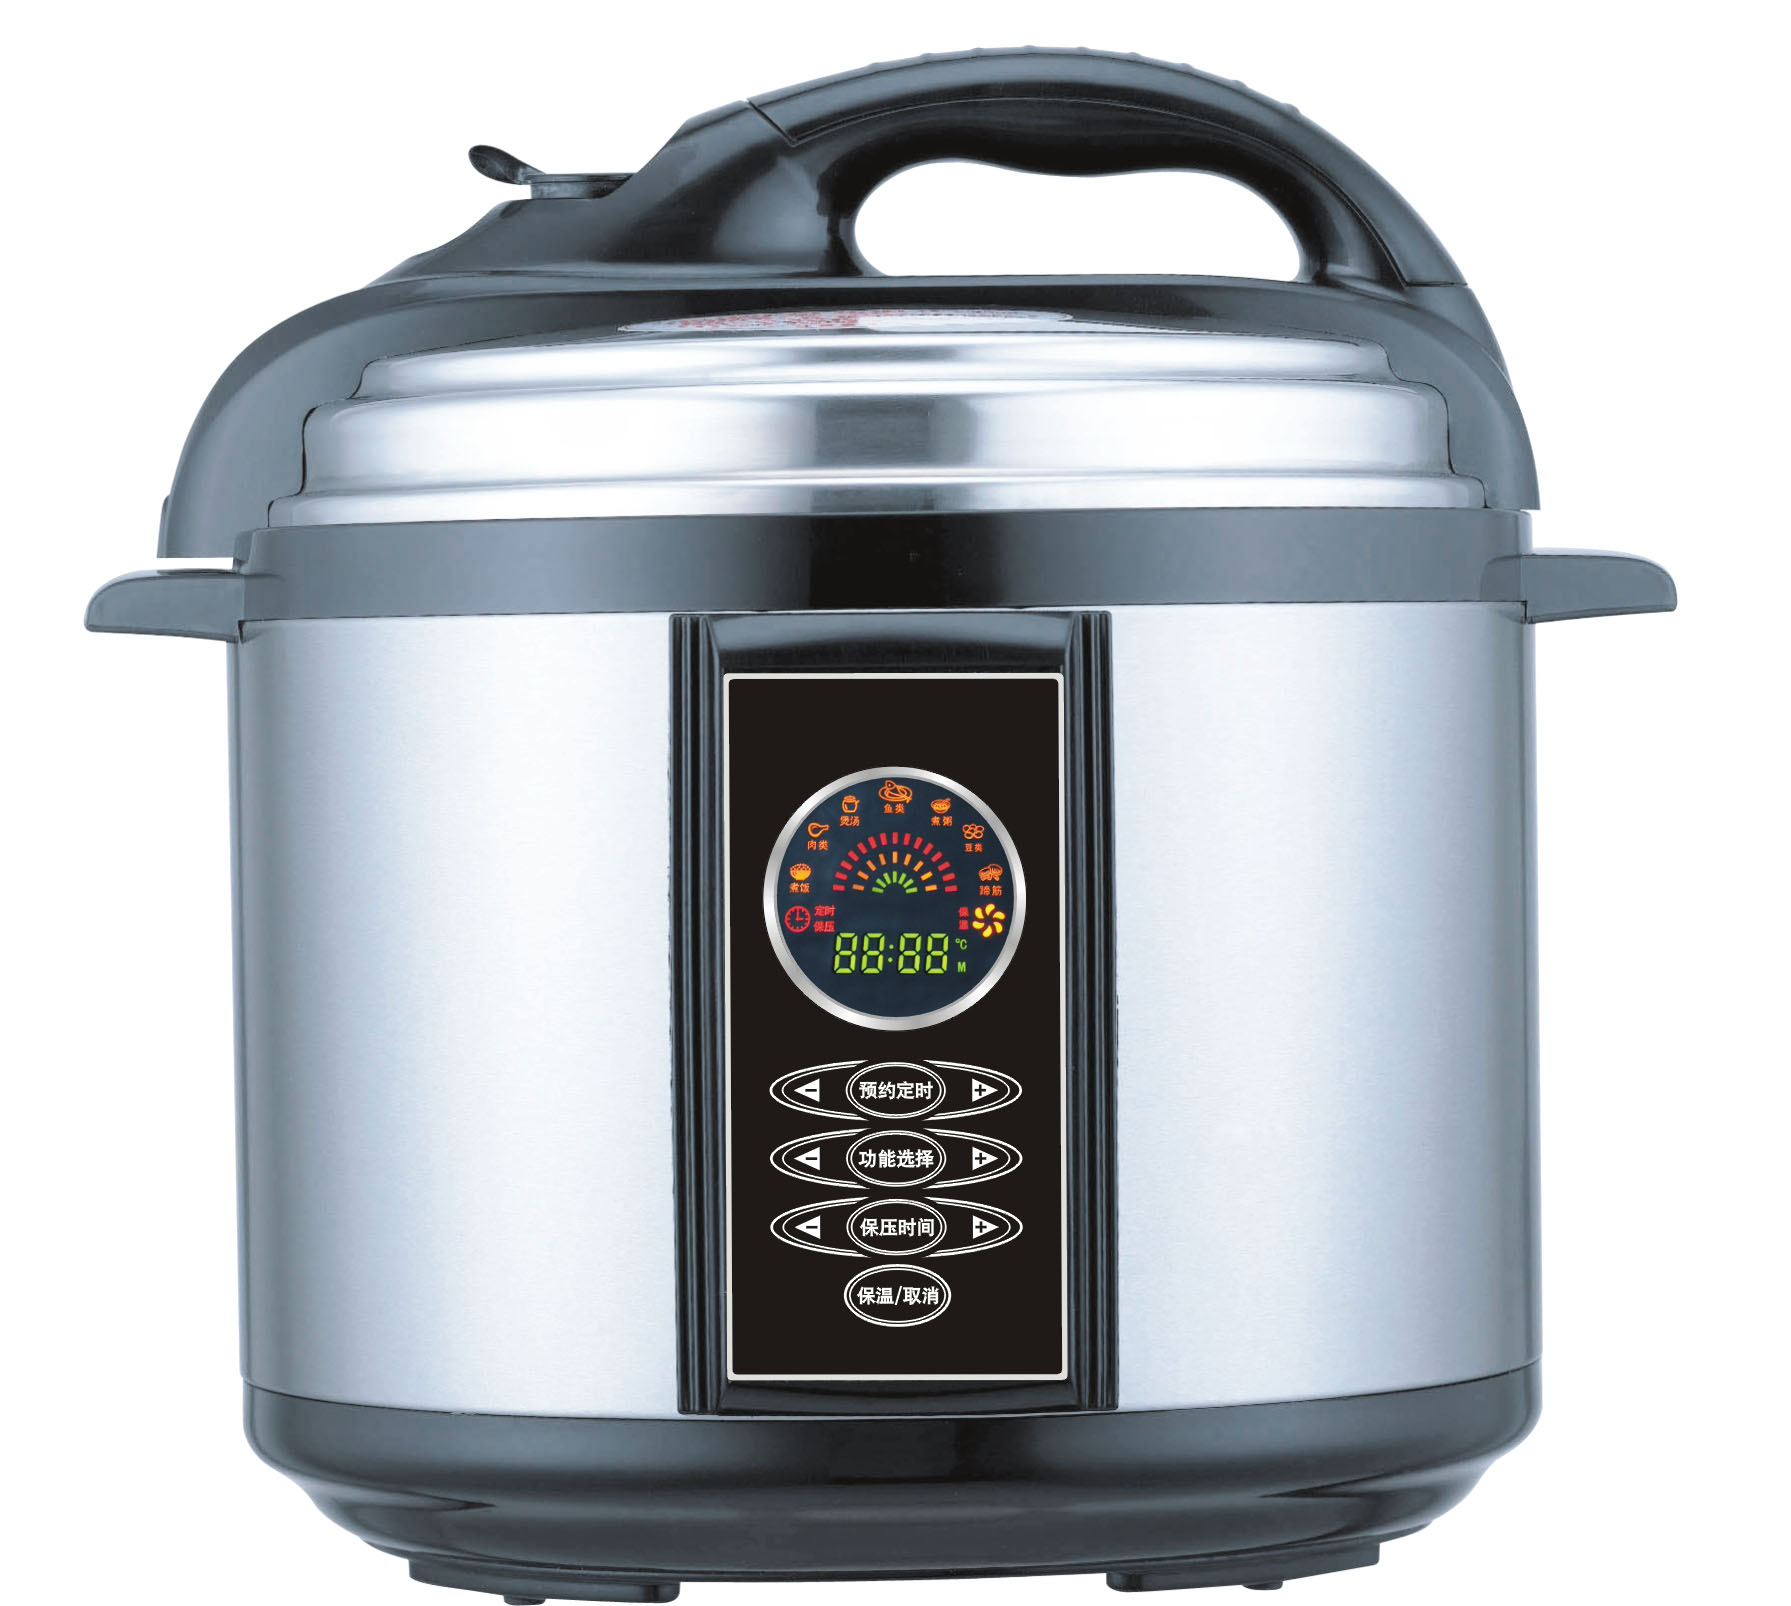  Latest 4th-Generation Programmable Pressure Cooker 7-in-1 multi-function Stainless Steel Cooking Pot eletric pressure cooker